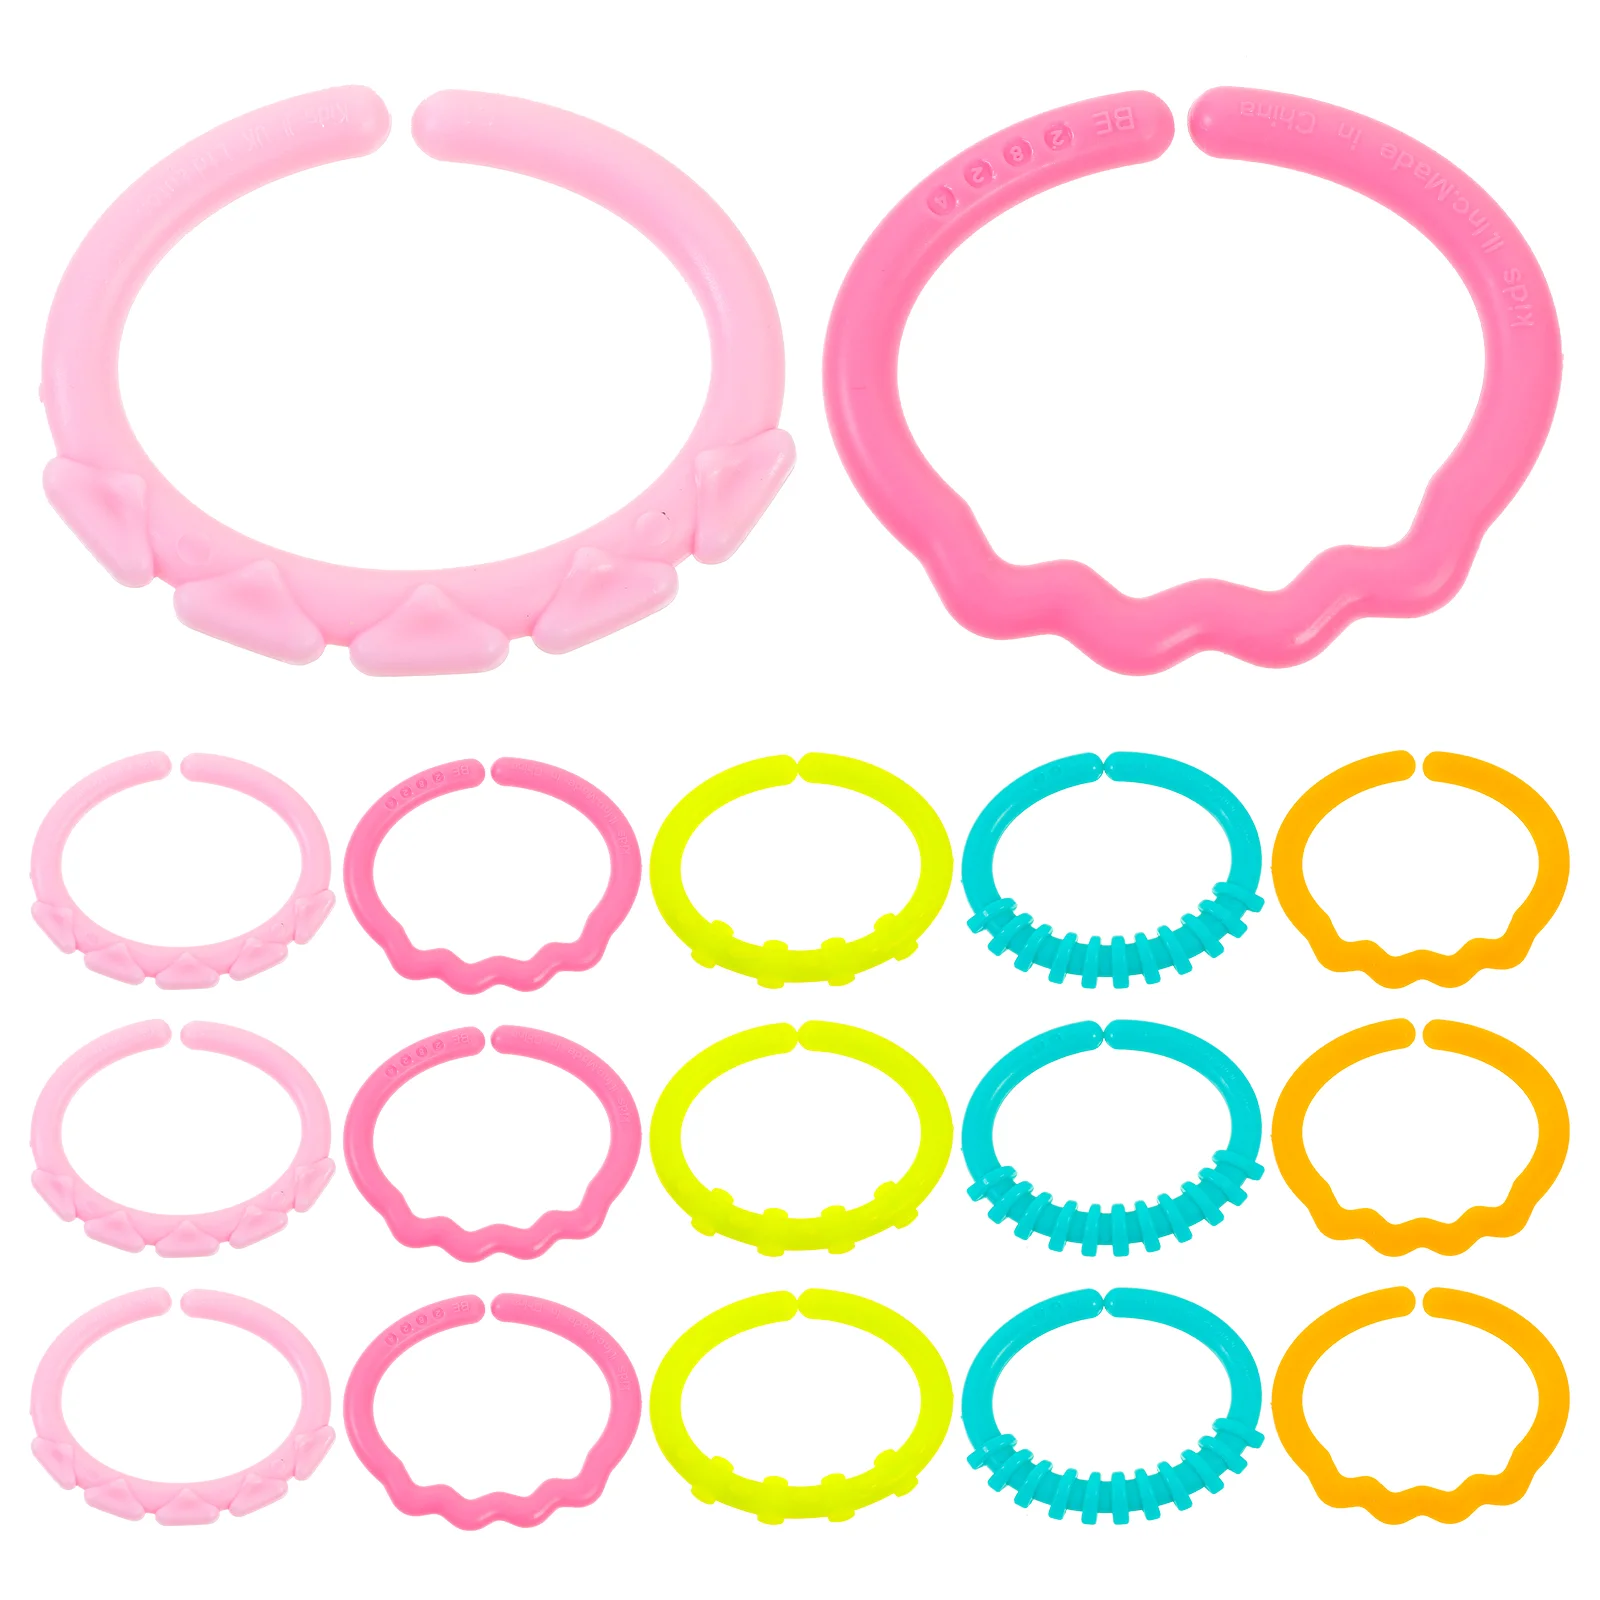 

24pcs rings Link Ring Car Crib Playmat Attach Toys Hand Grabbing Ring Early Education Learning Travel Accessory for Home